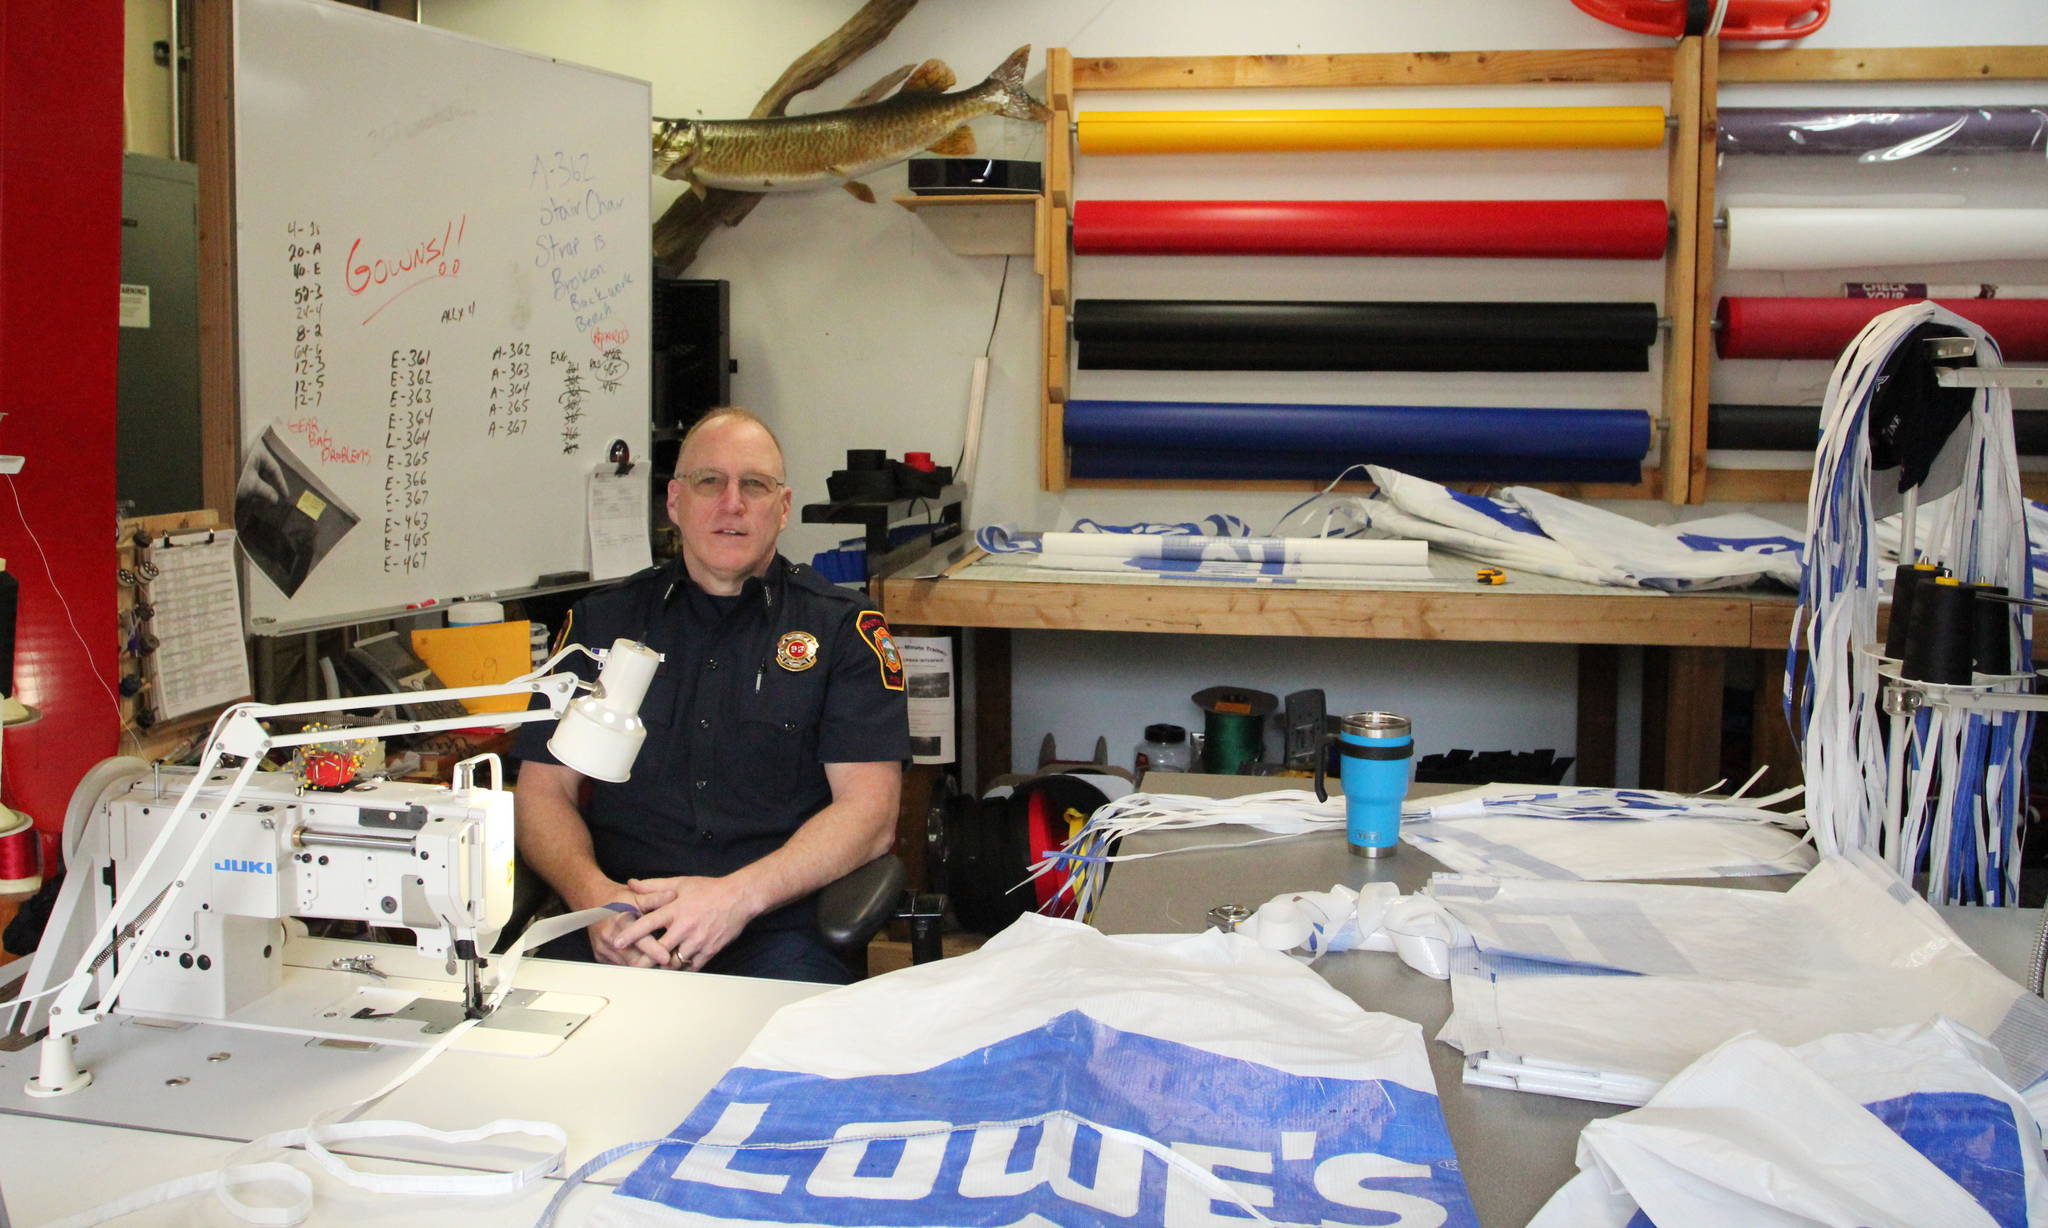 The sewing room at South King Fire’s Station 65 is where firefighter Jim Wilson creates equipment, engine covers, protective gowns and more for the department. Olivia Sullivan/staff photo